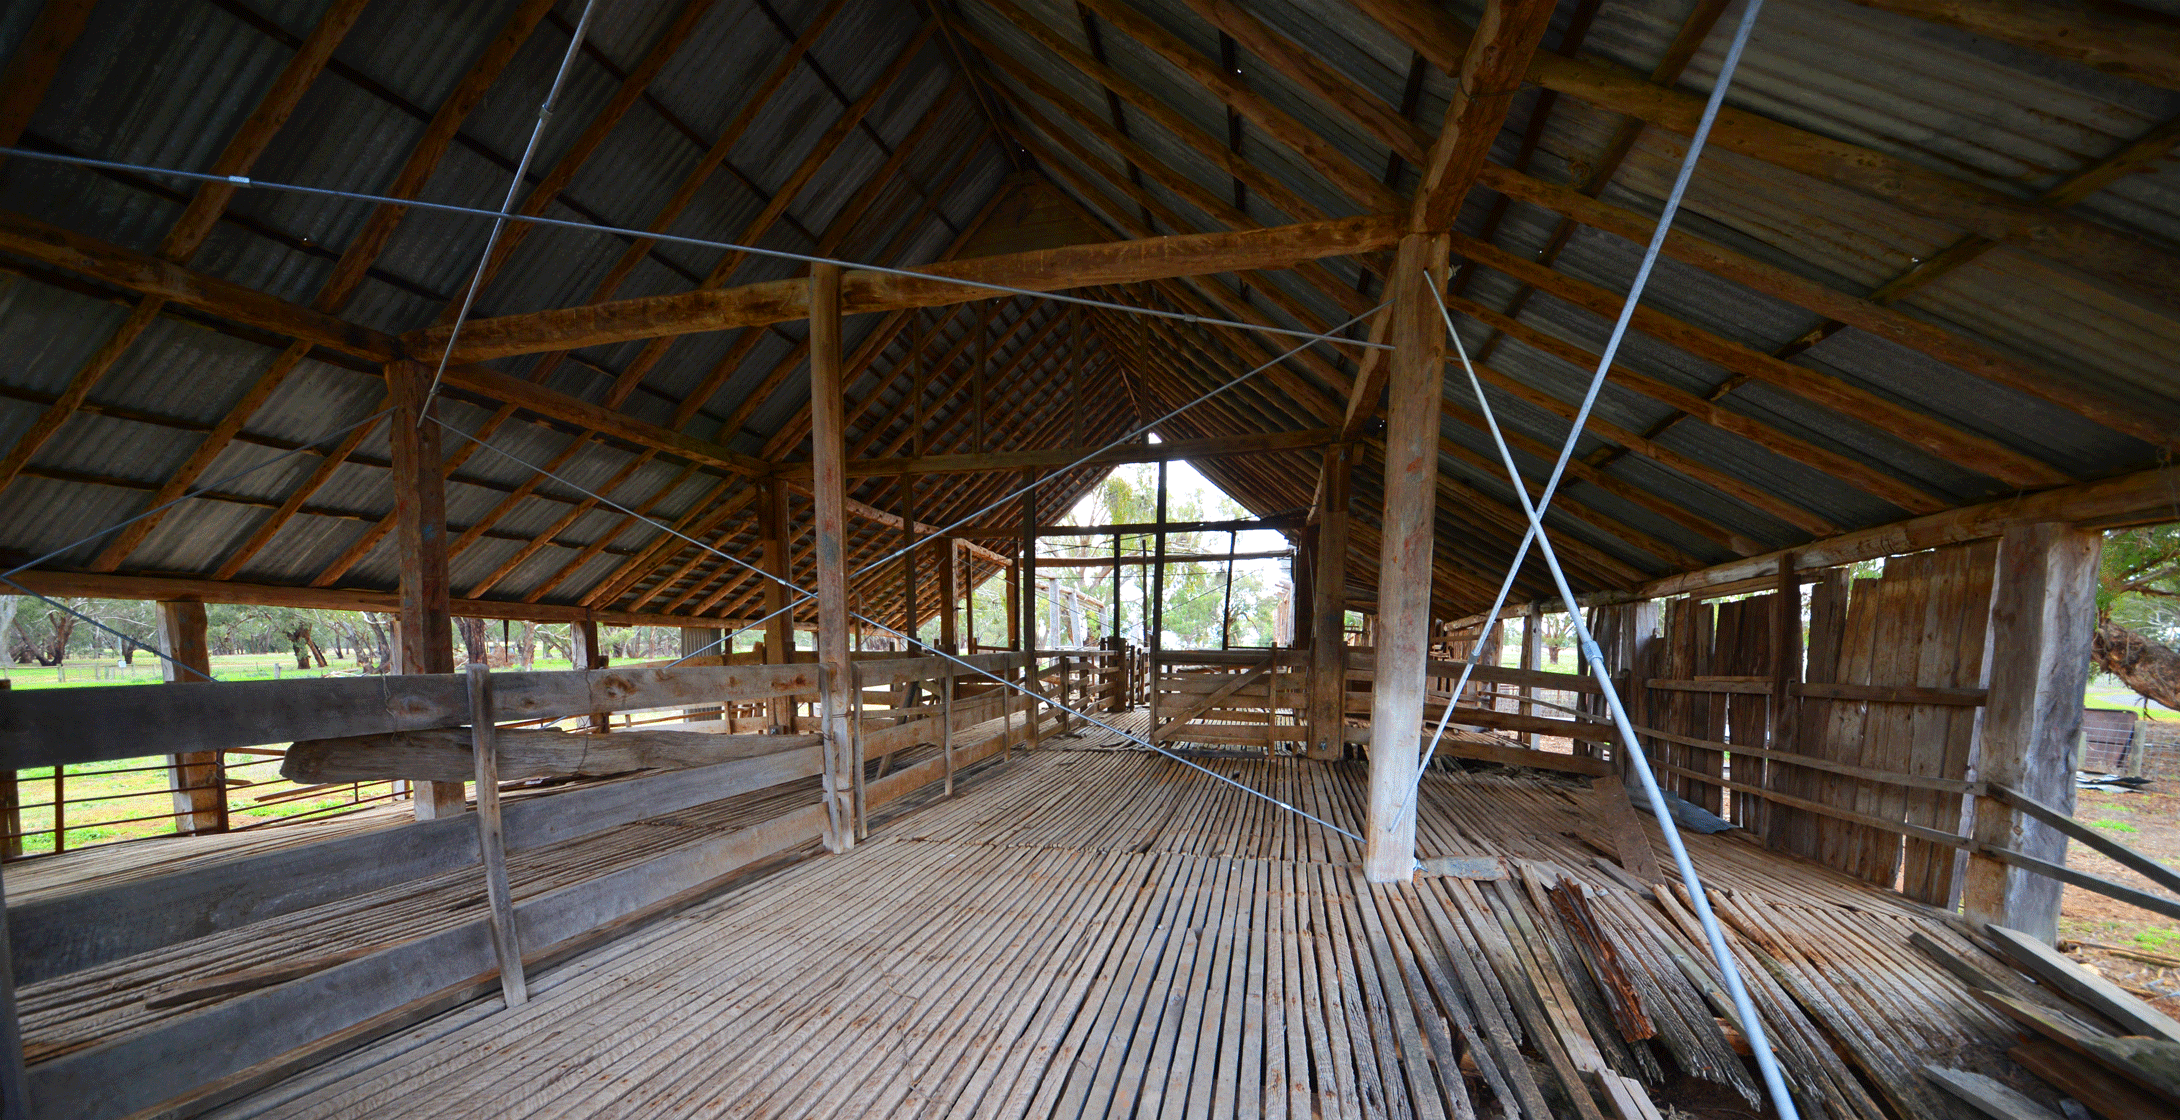 Photograph of dilapidated old shearing shed at Mulwala Homestead